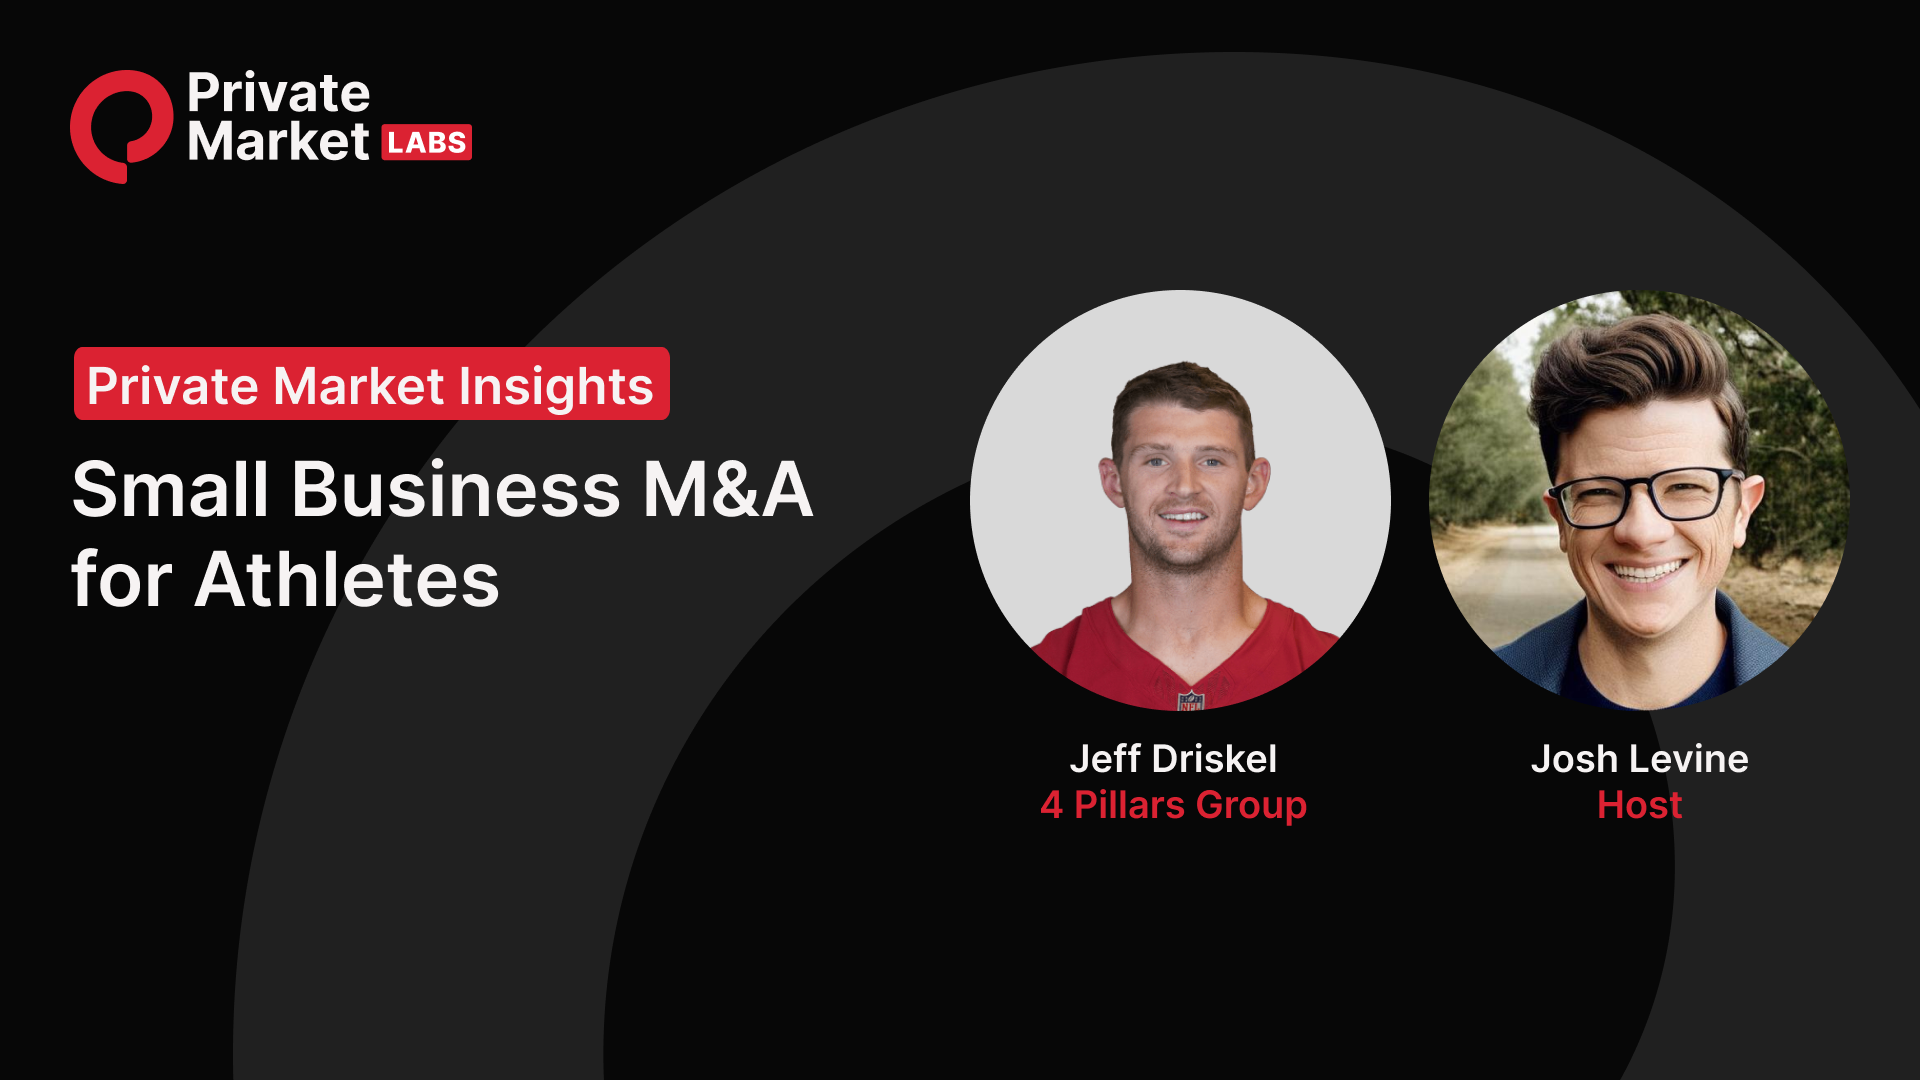 Small Business M&A for Athletes with Jeff Driskel